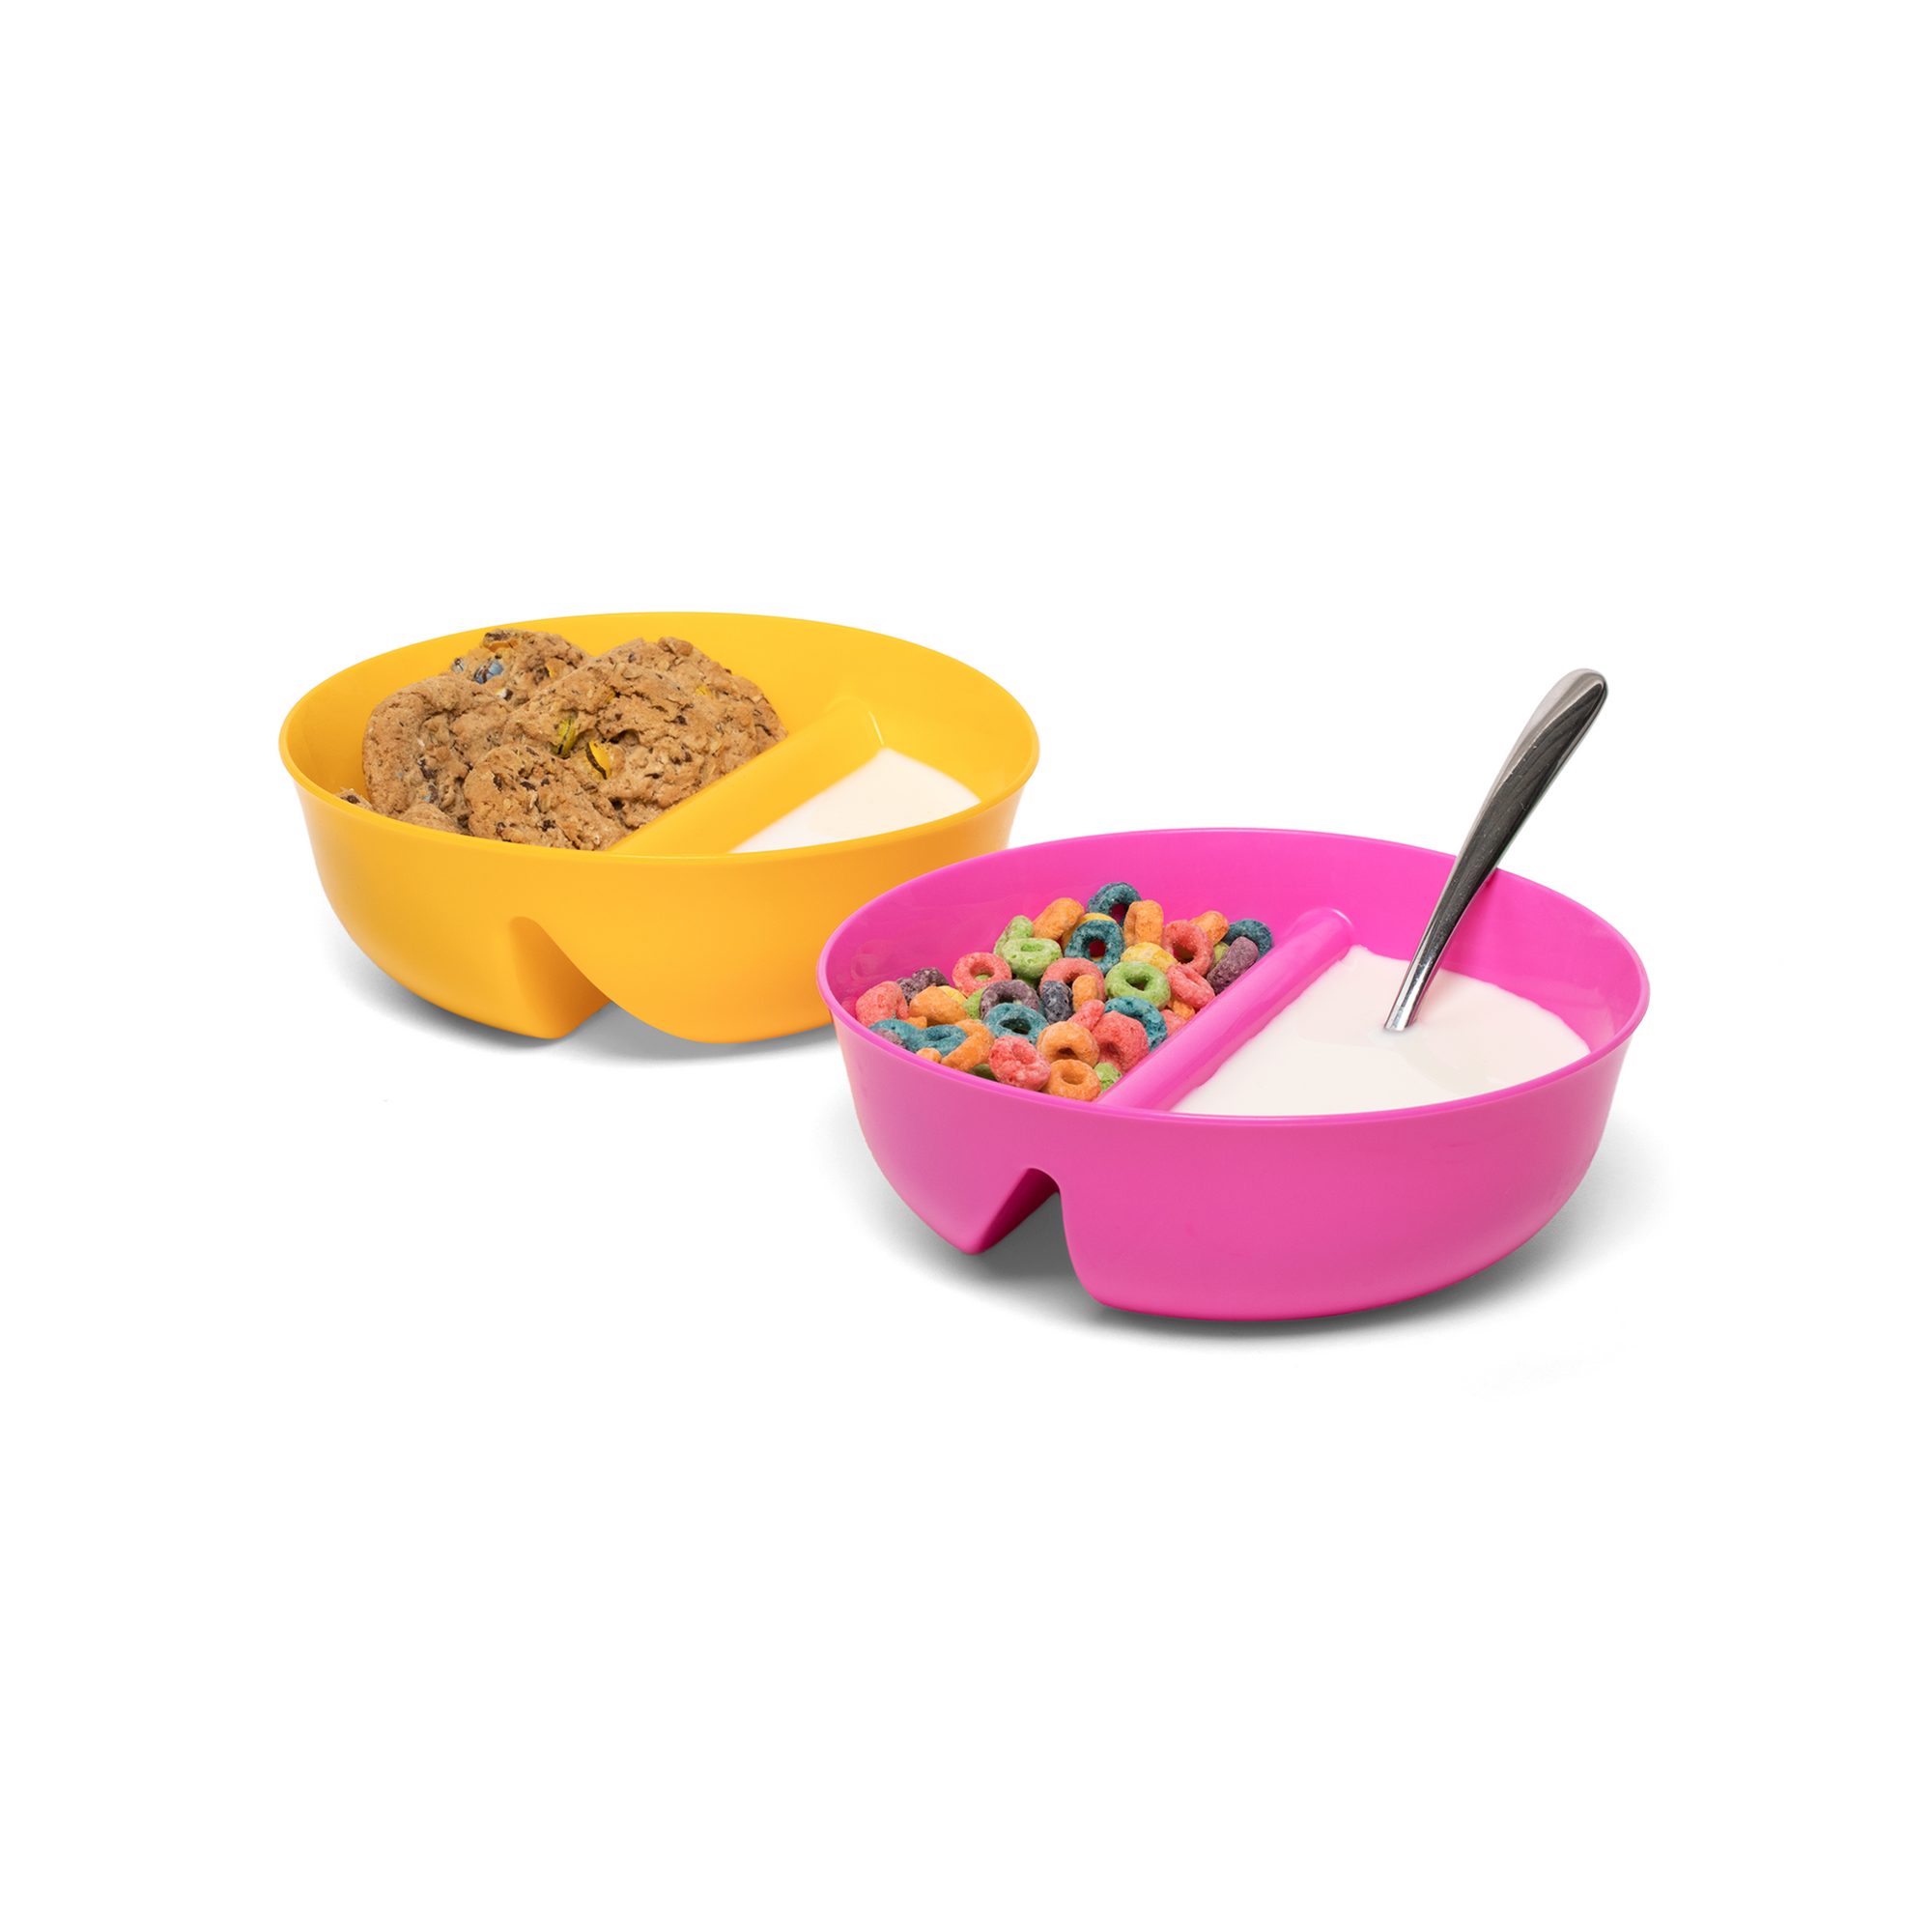 Chilled Cereal To Go Container Crunch Cold Cereal Cup Purple